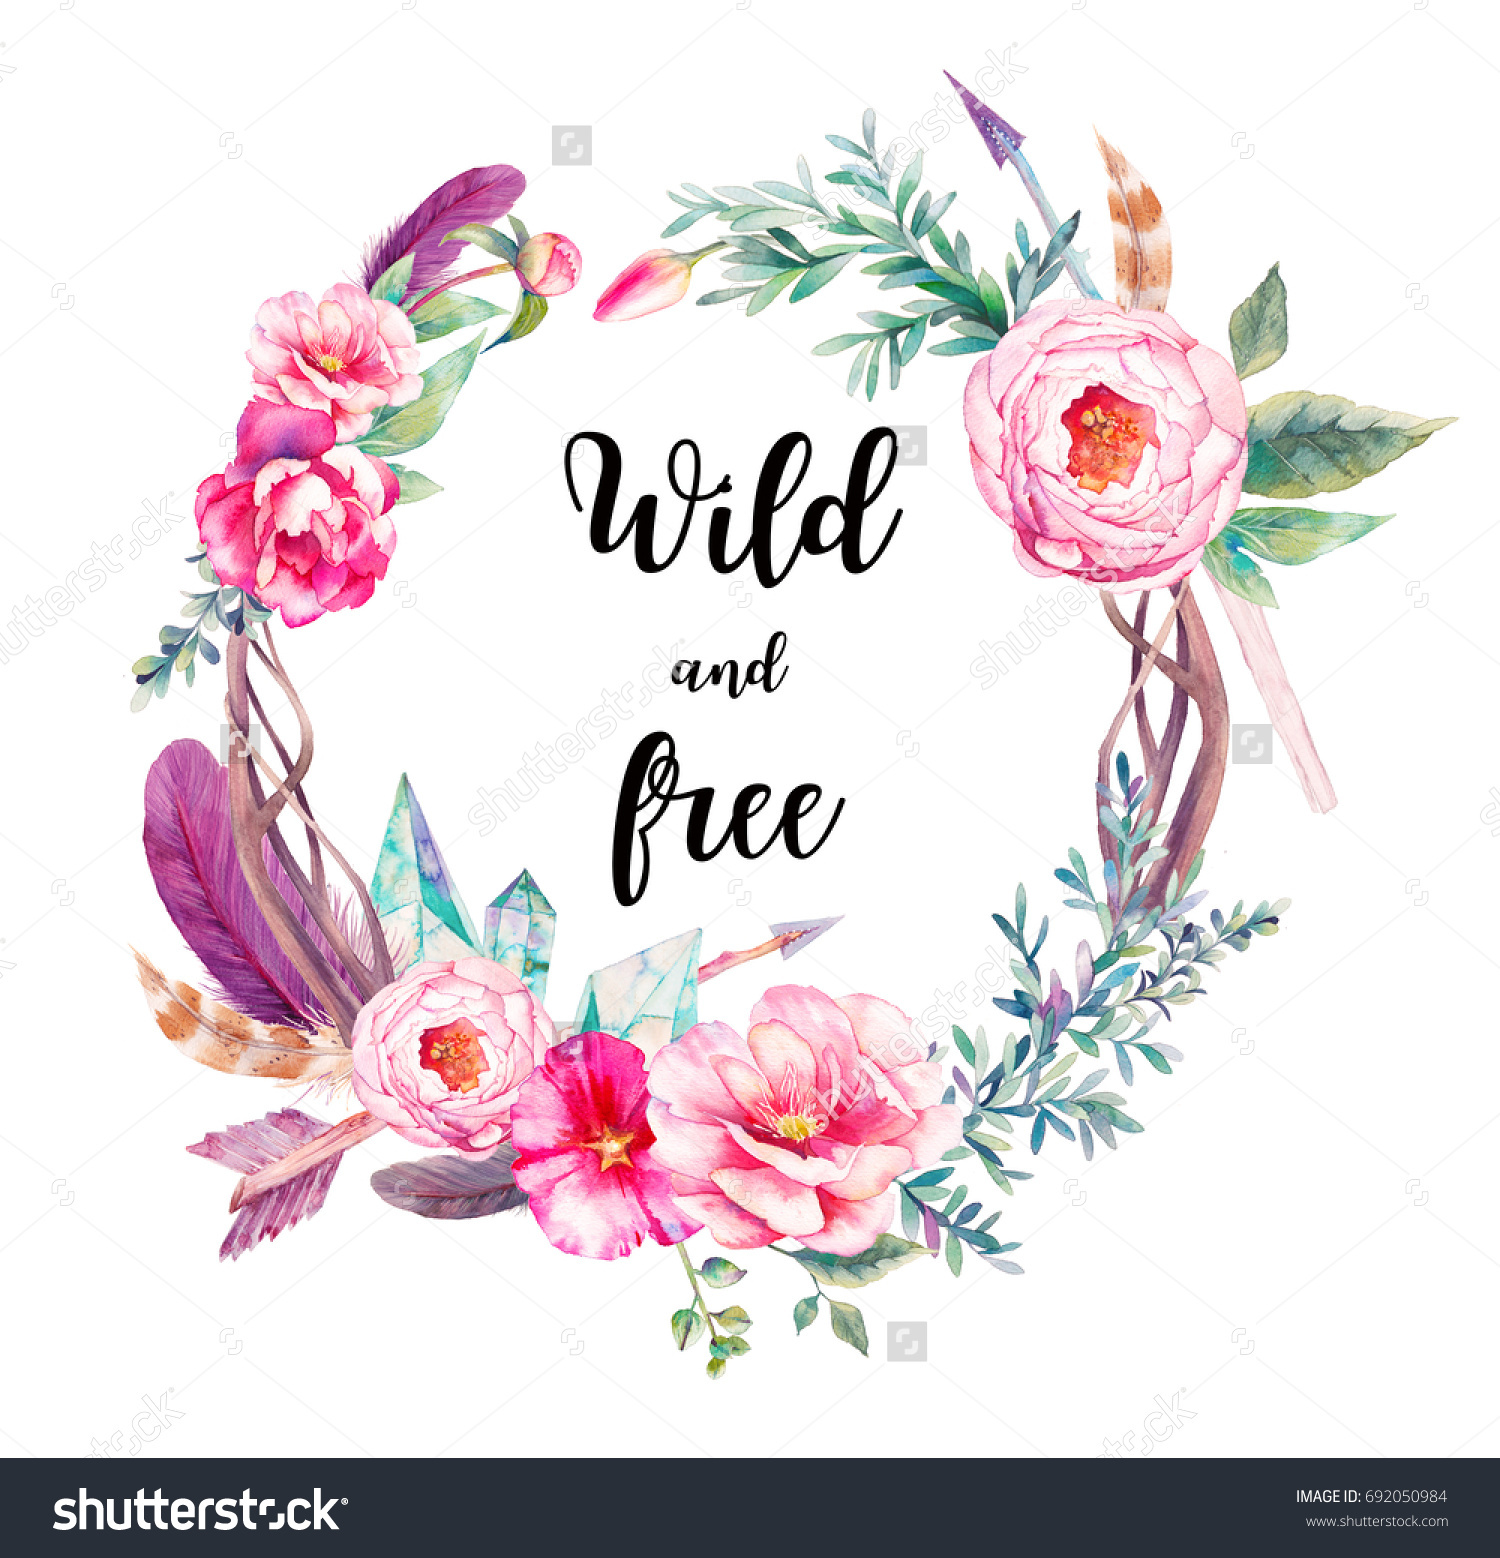 stock photo watercolor boho chic eucalyptus and tree branches wreath with flowers bouquet arrows and feathers 692050984